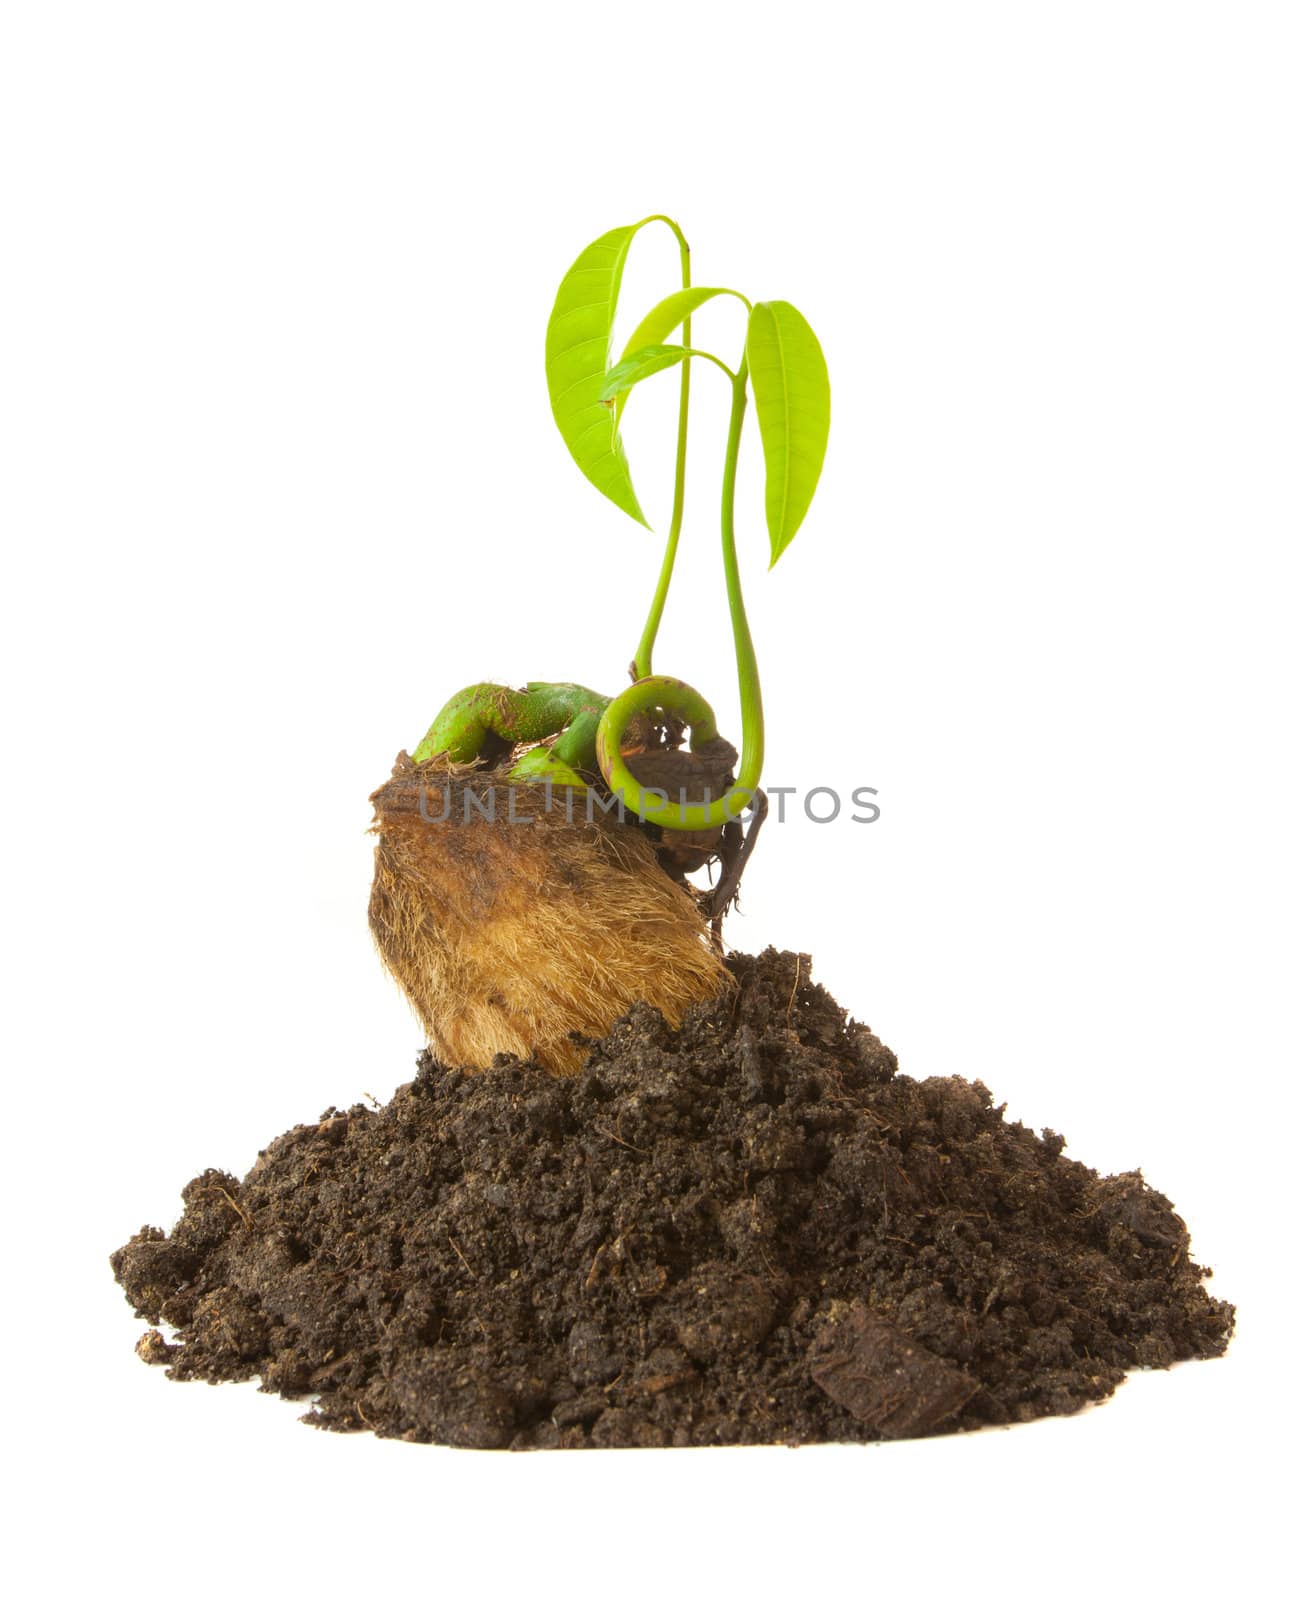 Growing green plant isolated on white background